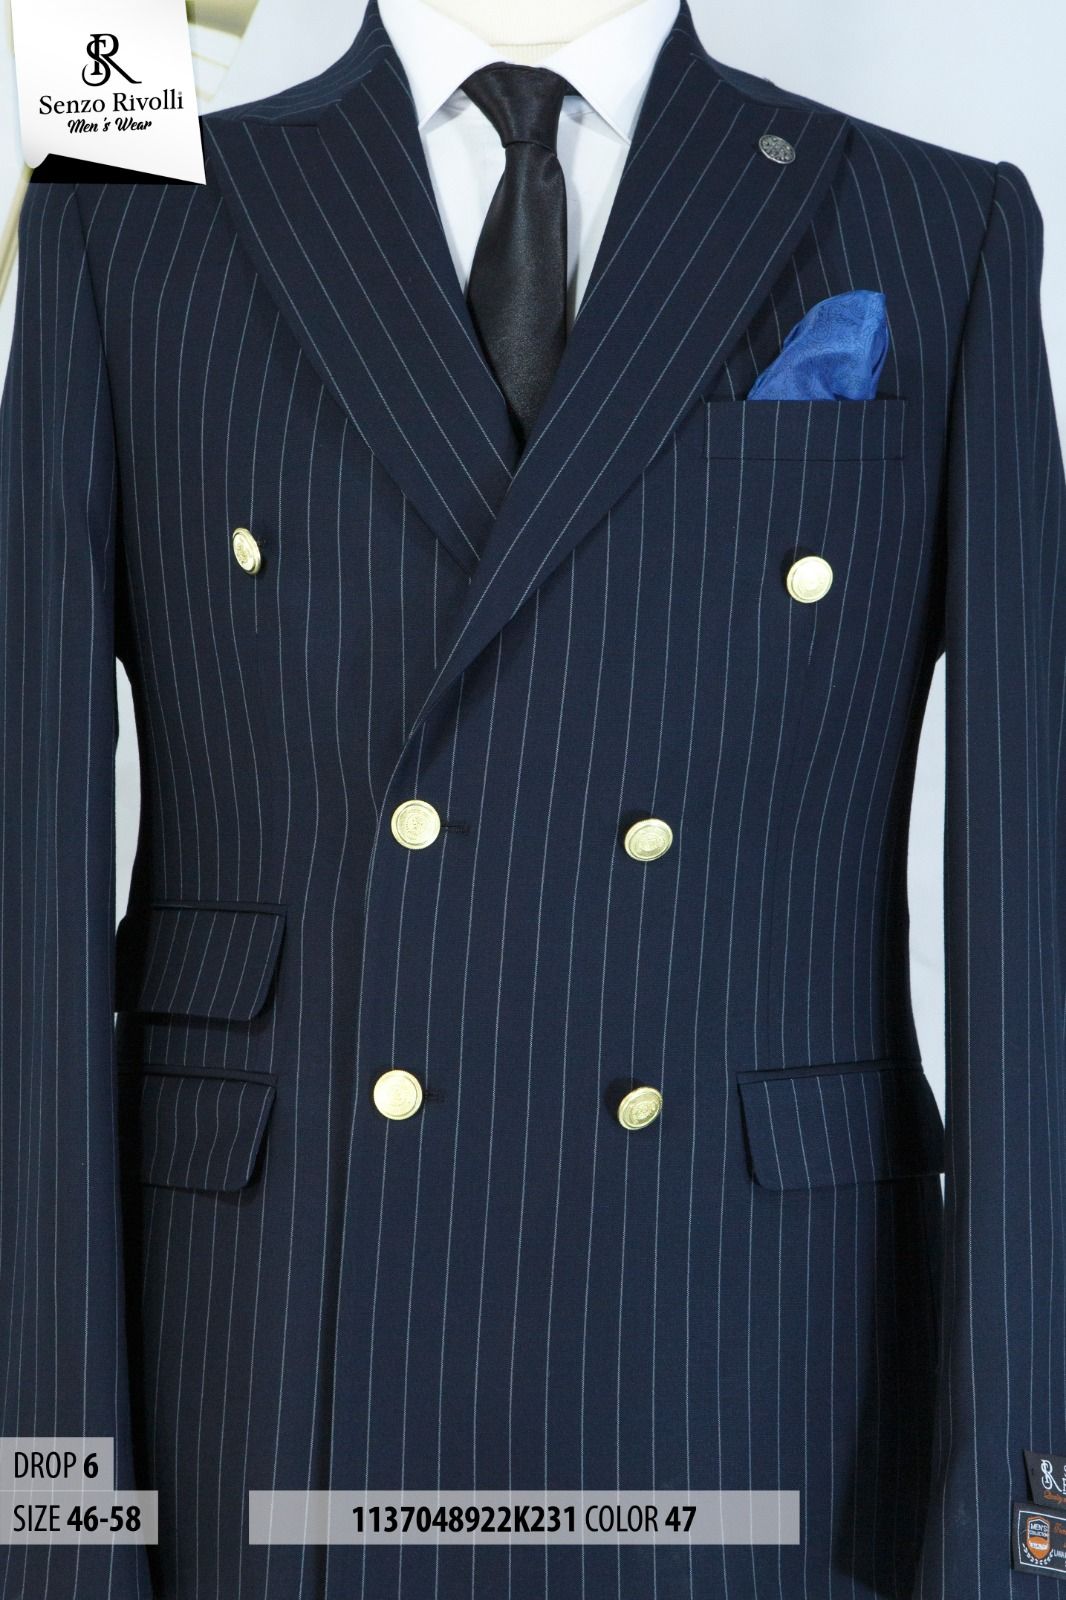 EXECUTIVE DARK GREY STRIPPED BREASTED TURKEY SUIT WITH GOLDEN BUTTON-deluxe.com.ng